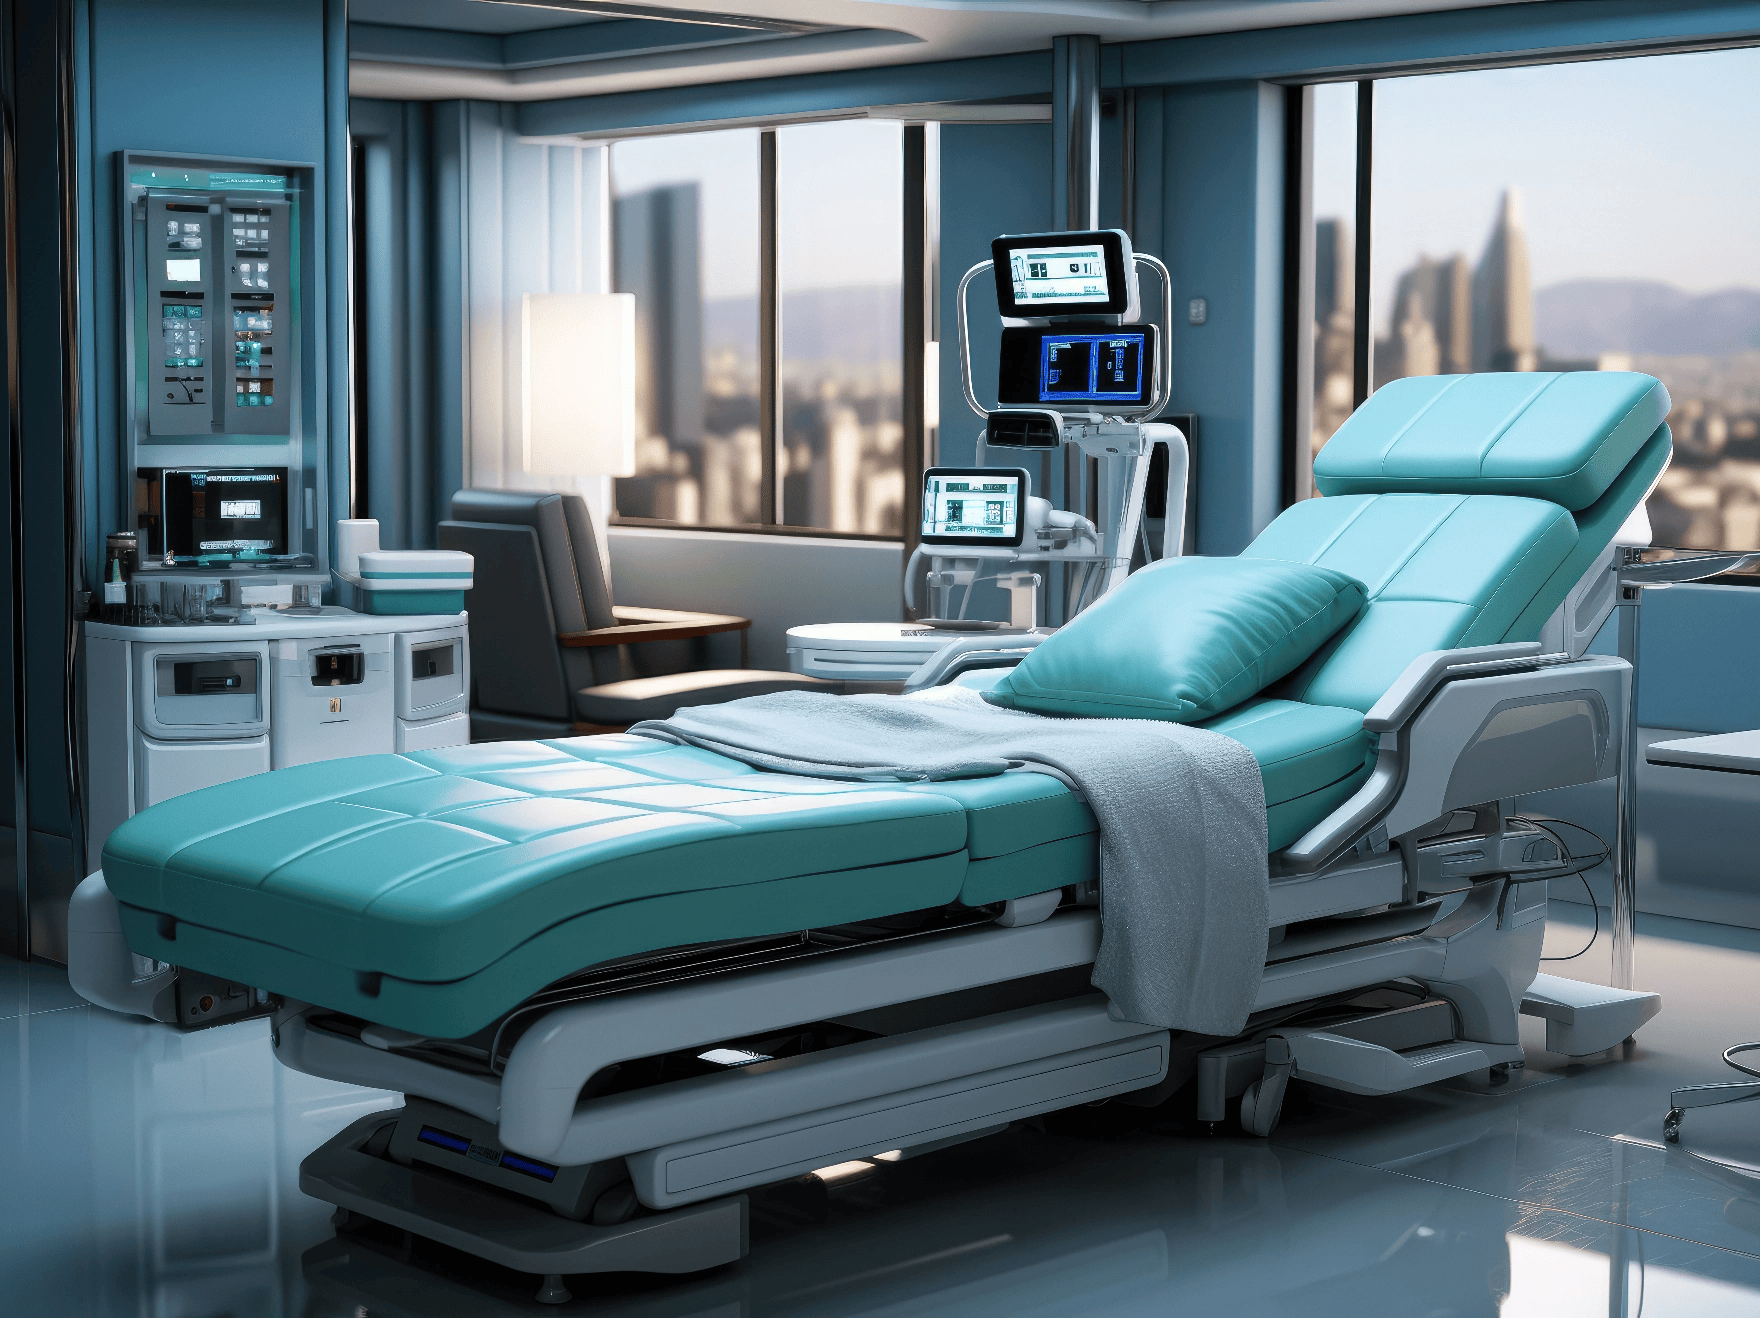 Teal hospital bed with equipment surrounding it, the bed is located in a room in a high rise building with the city skyline in view out the window